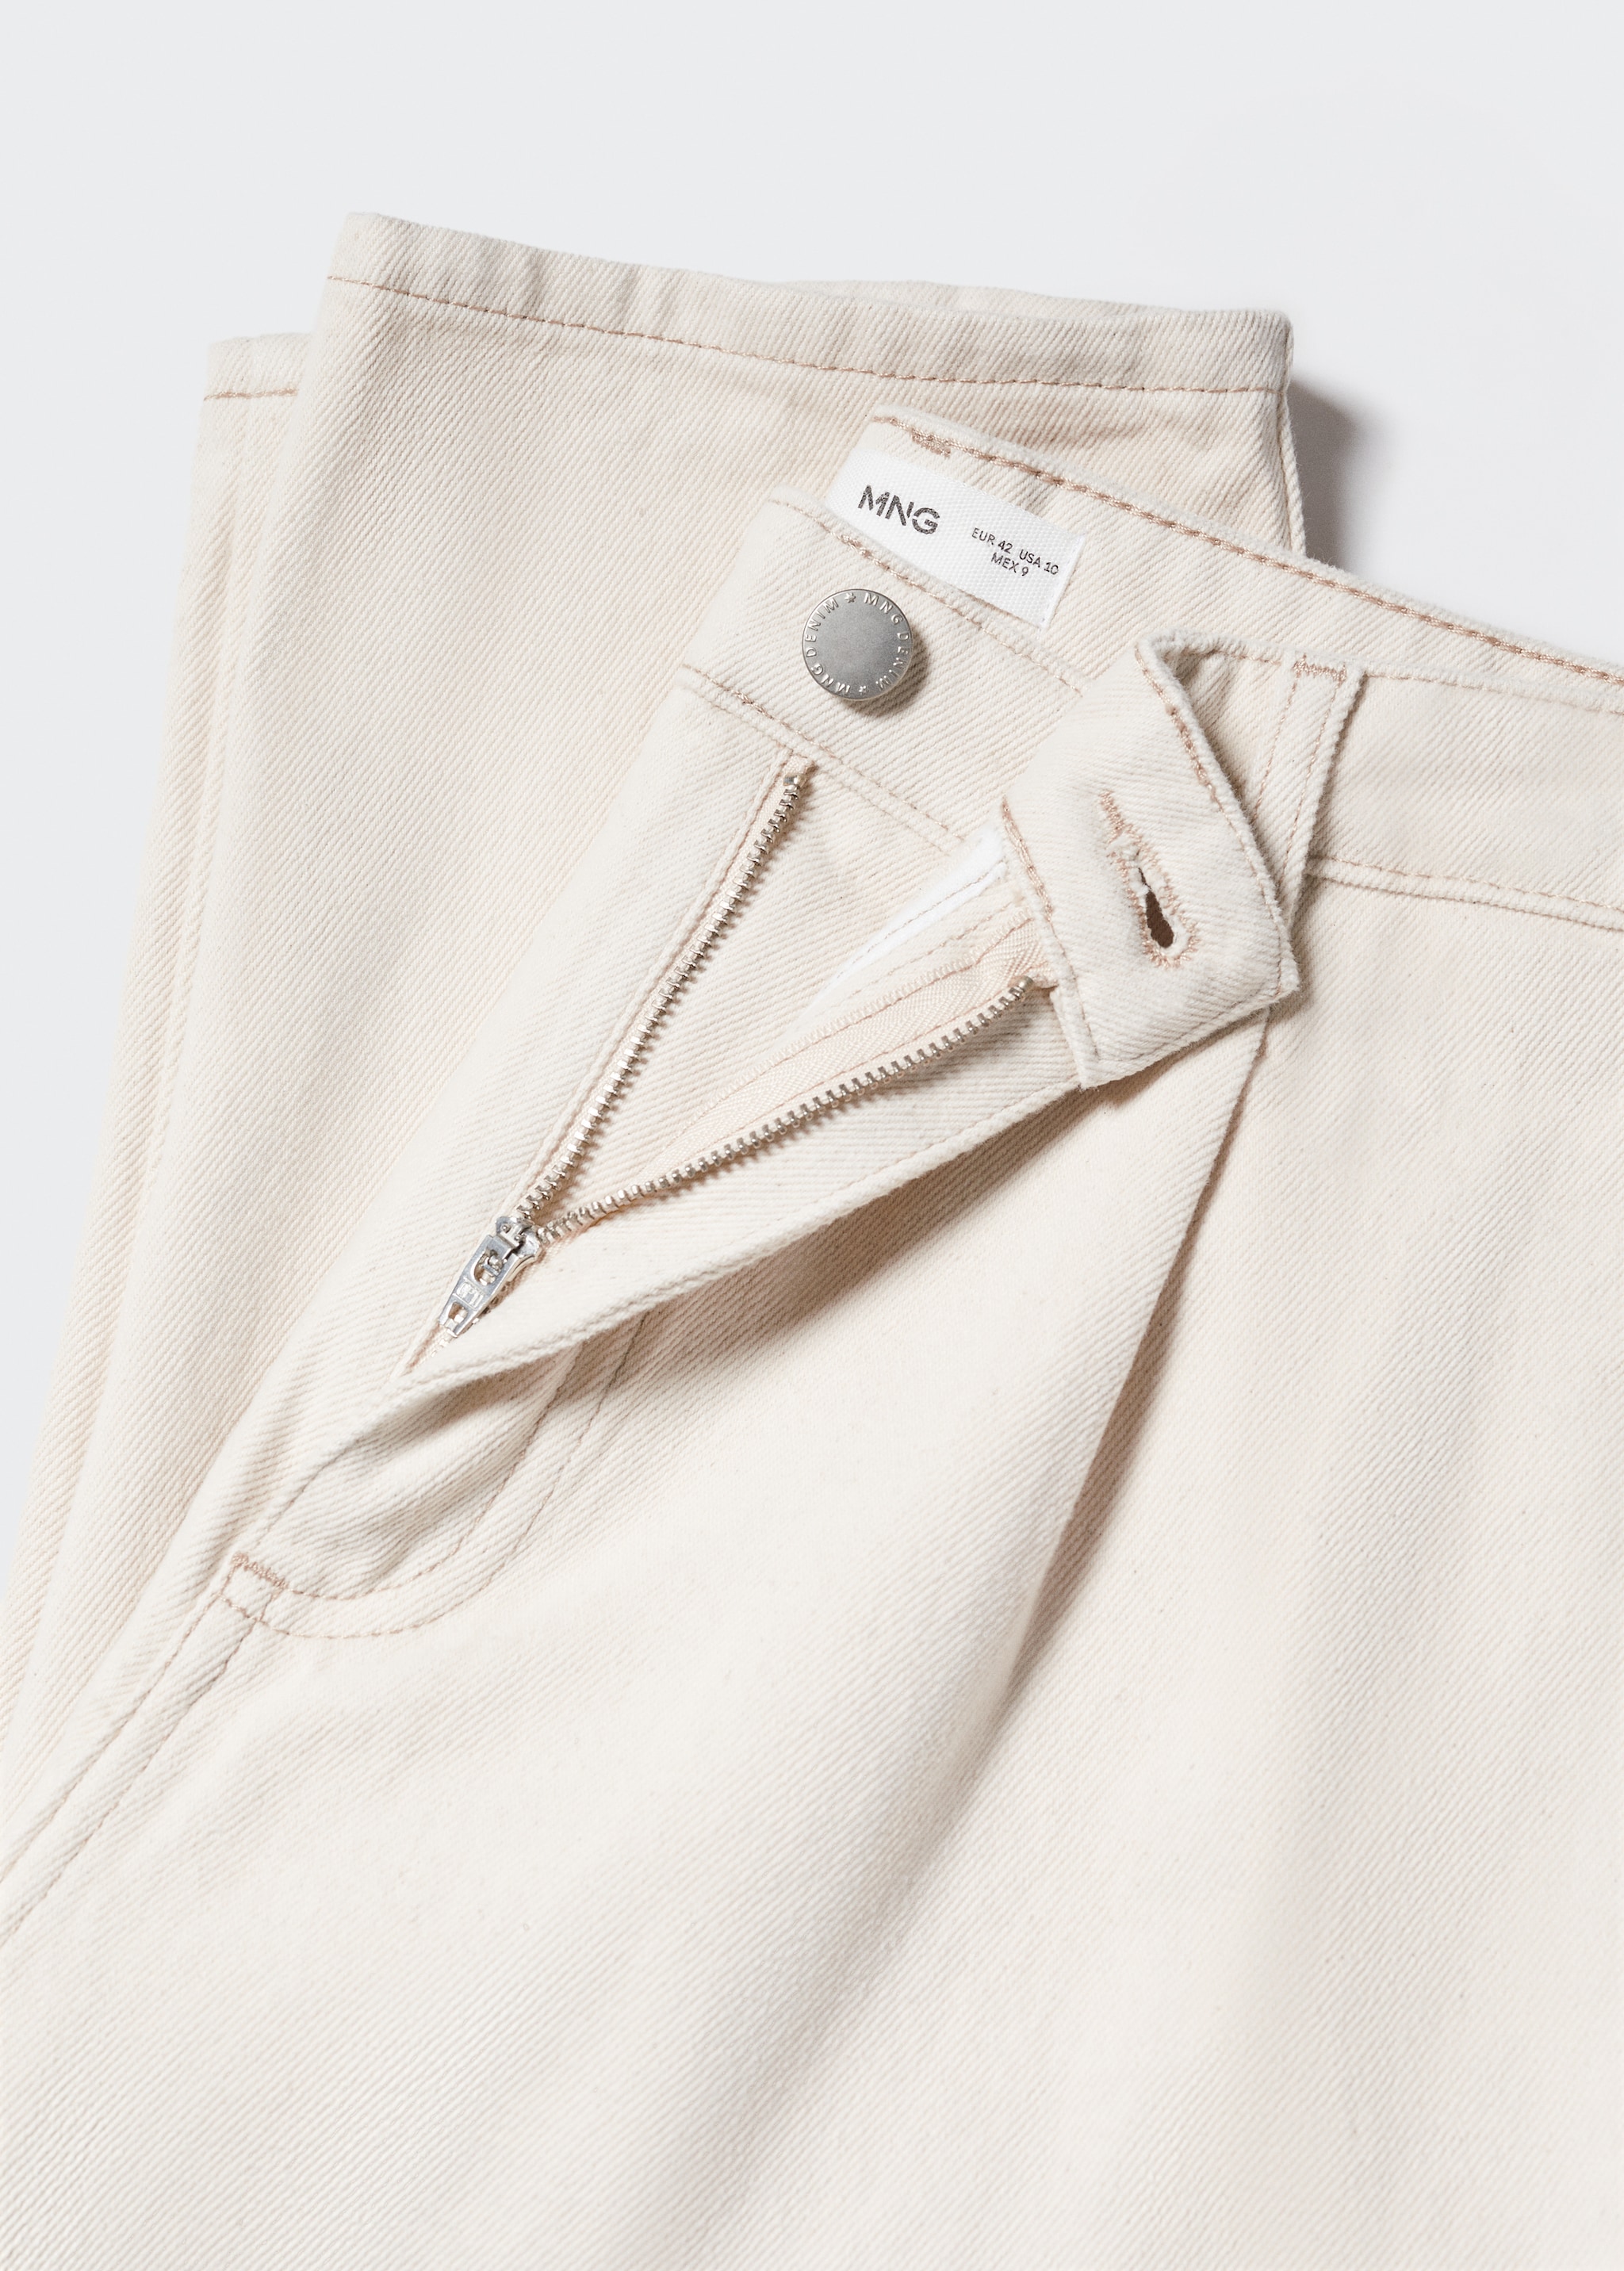 Dart slouchy jeans - Details of the article 8